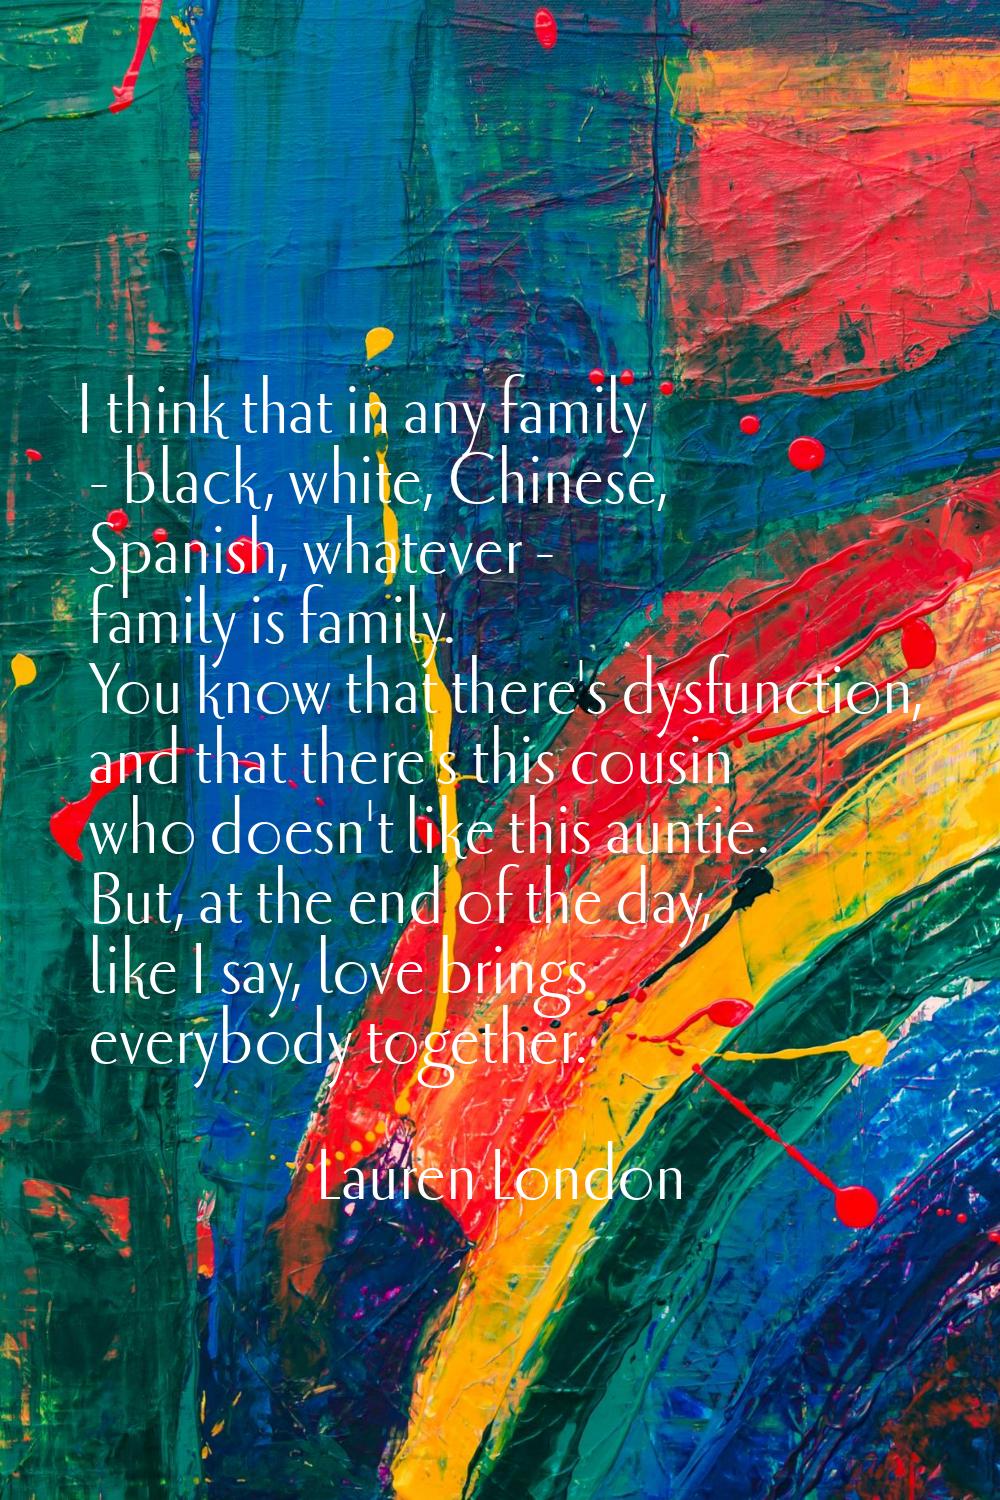 I think that in any family - black, white, Chinese, Spanish, whatever - family is family. You know 